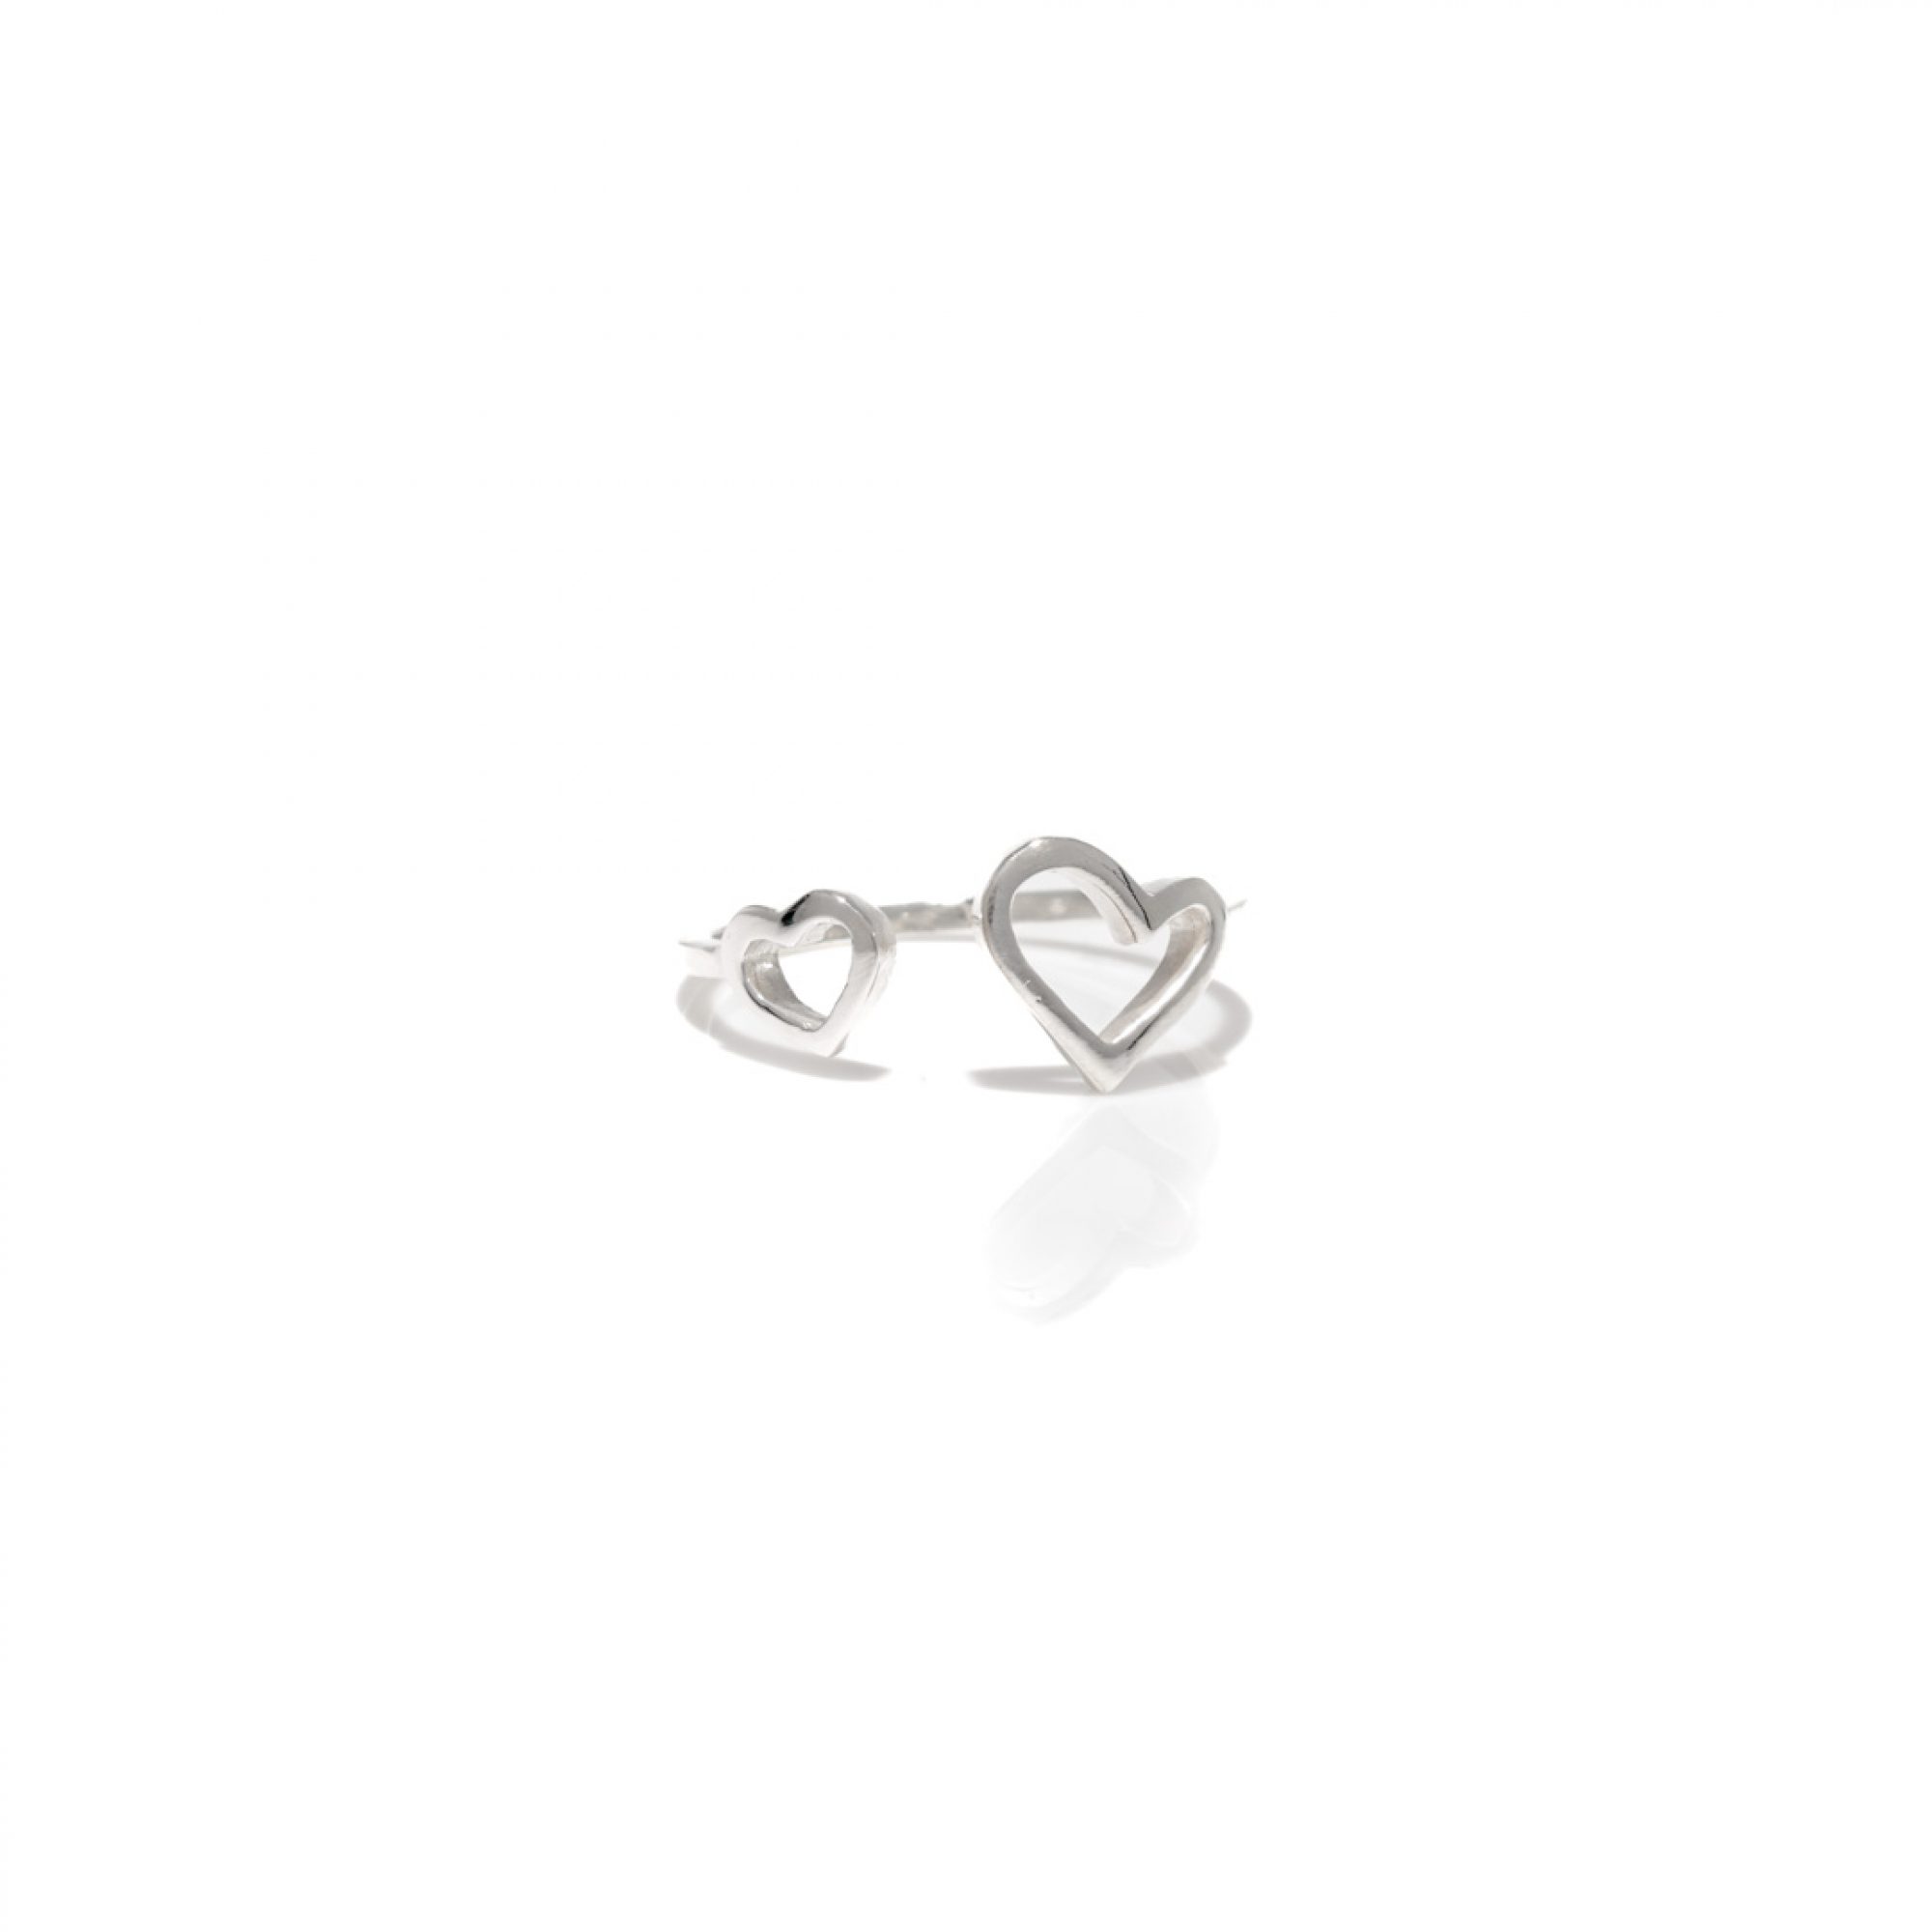 Silver ring with hearts